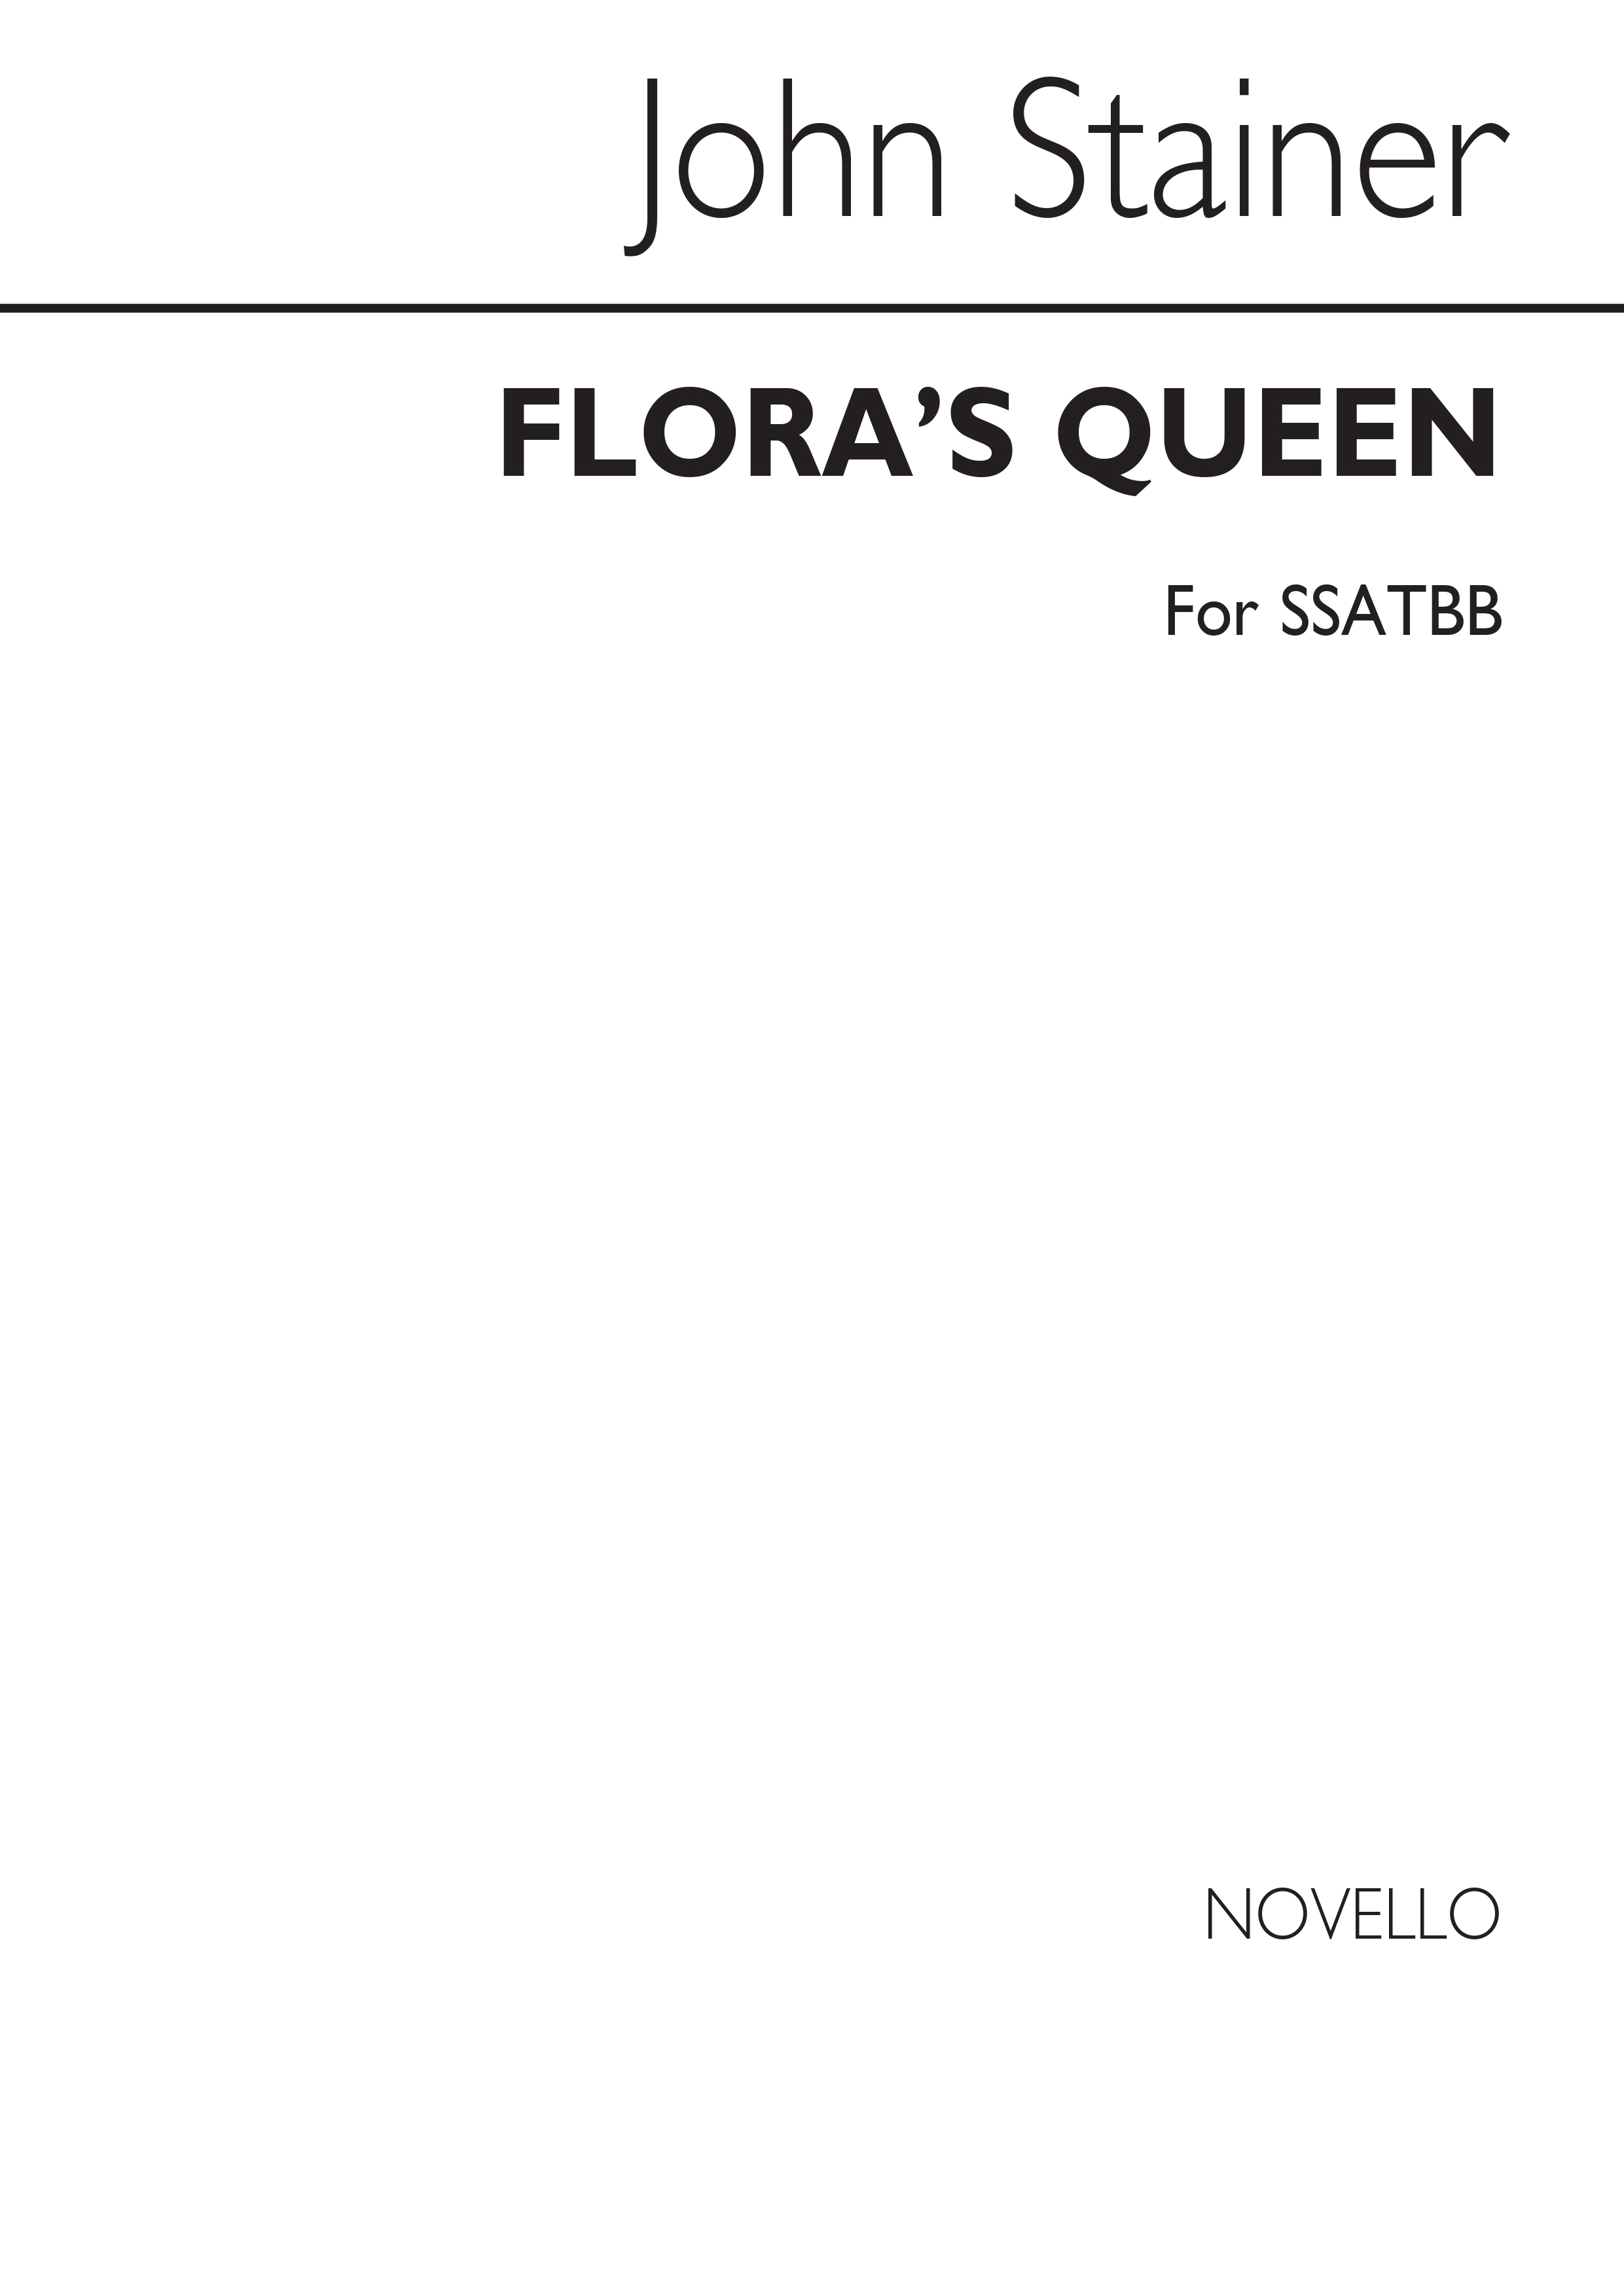 Sir John Stainer: Flora's Queen: SATB: Vocal Score